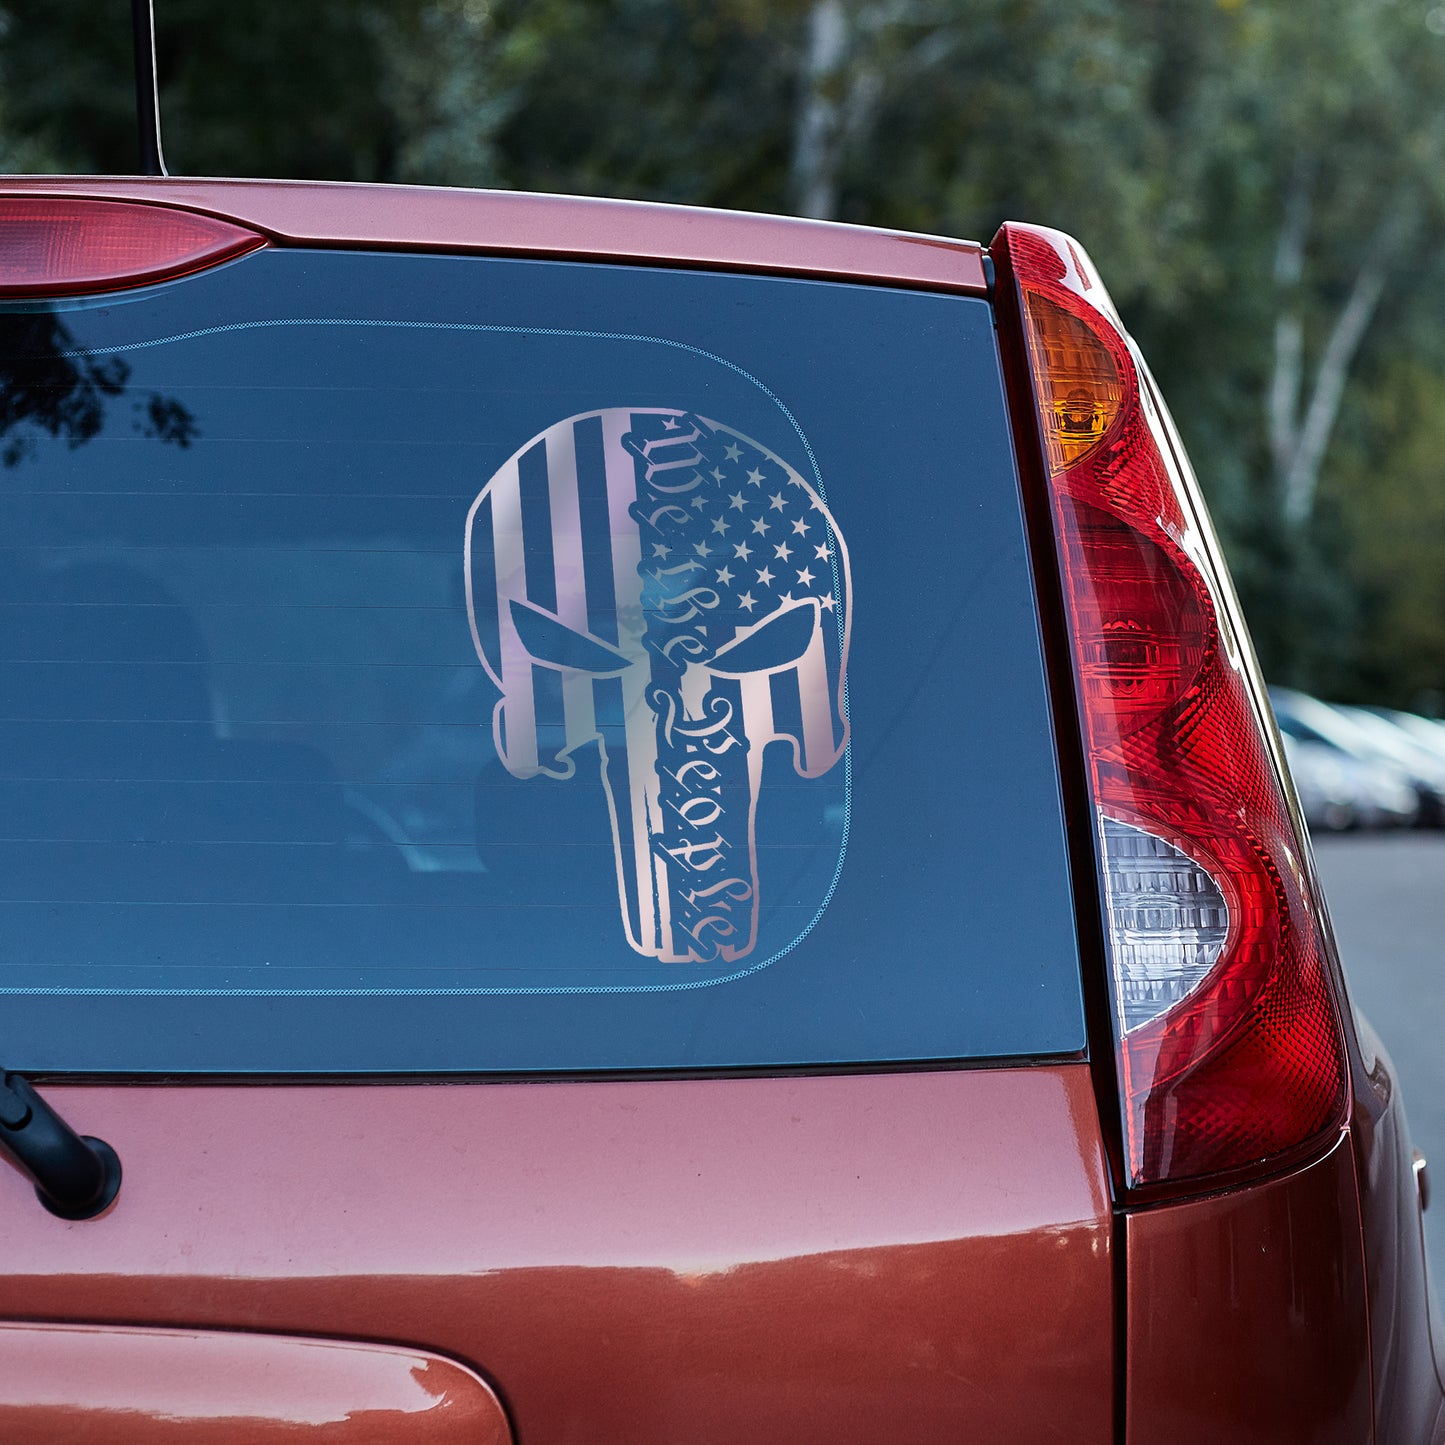 We the people patriotic skull vinyl decal 1776 decal stickers Decals for cars Decals for Trucks decals for tumblers freedom liberty minivan sticker SUV decals truck decals window decal car Window decals window decor